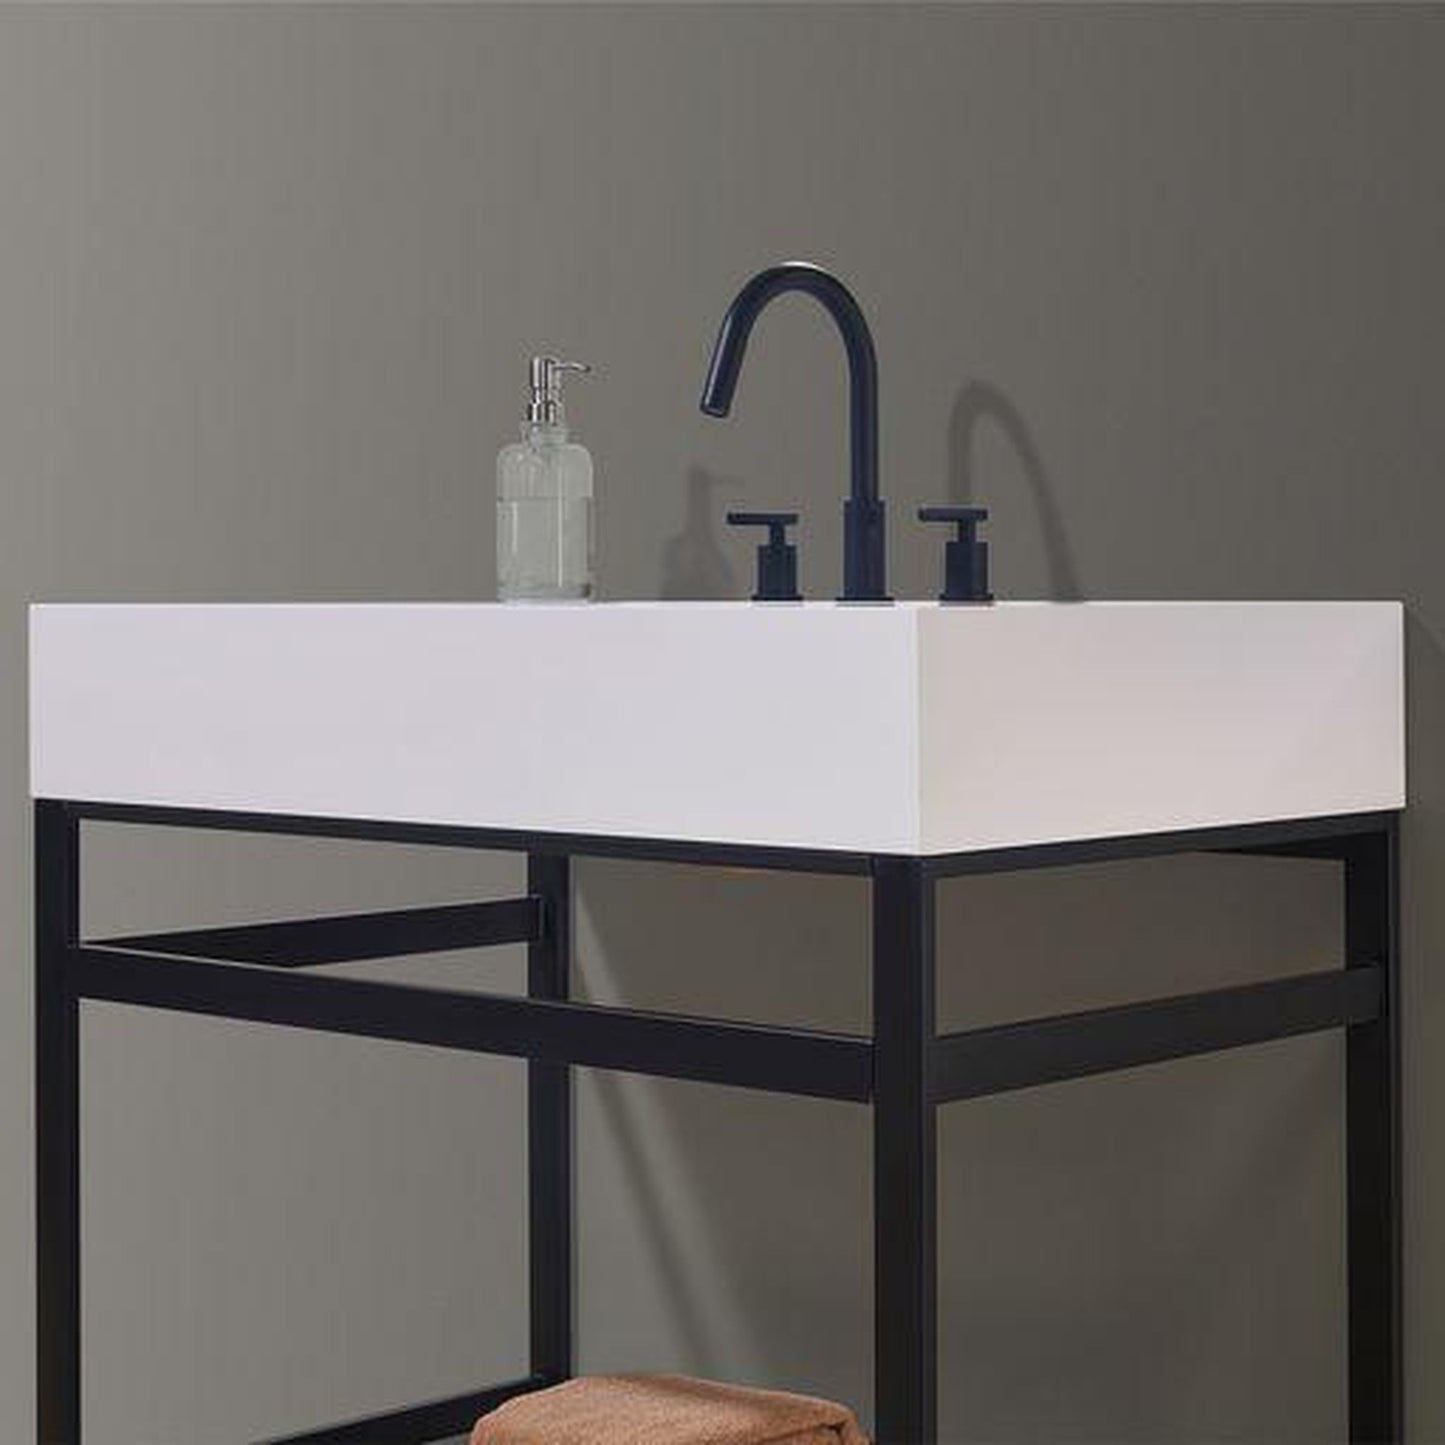 Altair Edolo 36" Matte Black Single Stainless Steel Bathroom Vanity Set Console With Snow White Stone Top, Single Rectangular Undermount Ceramic Sink, and Safety Overflow Hole